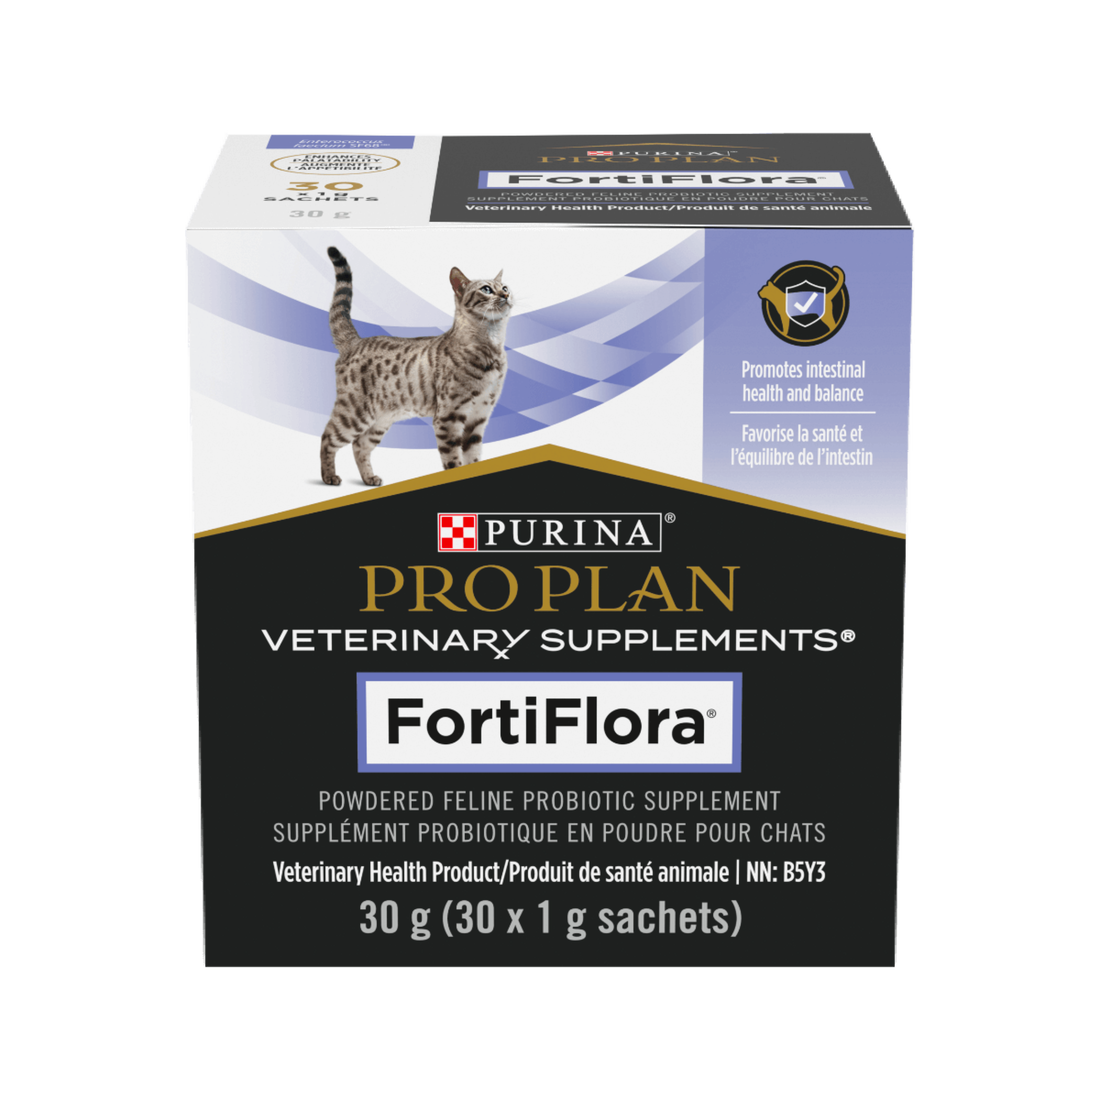 【PURINA】PRO PLAN FortiFlora® Powdered Probiotic Supplement for Cats